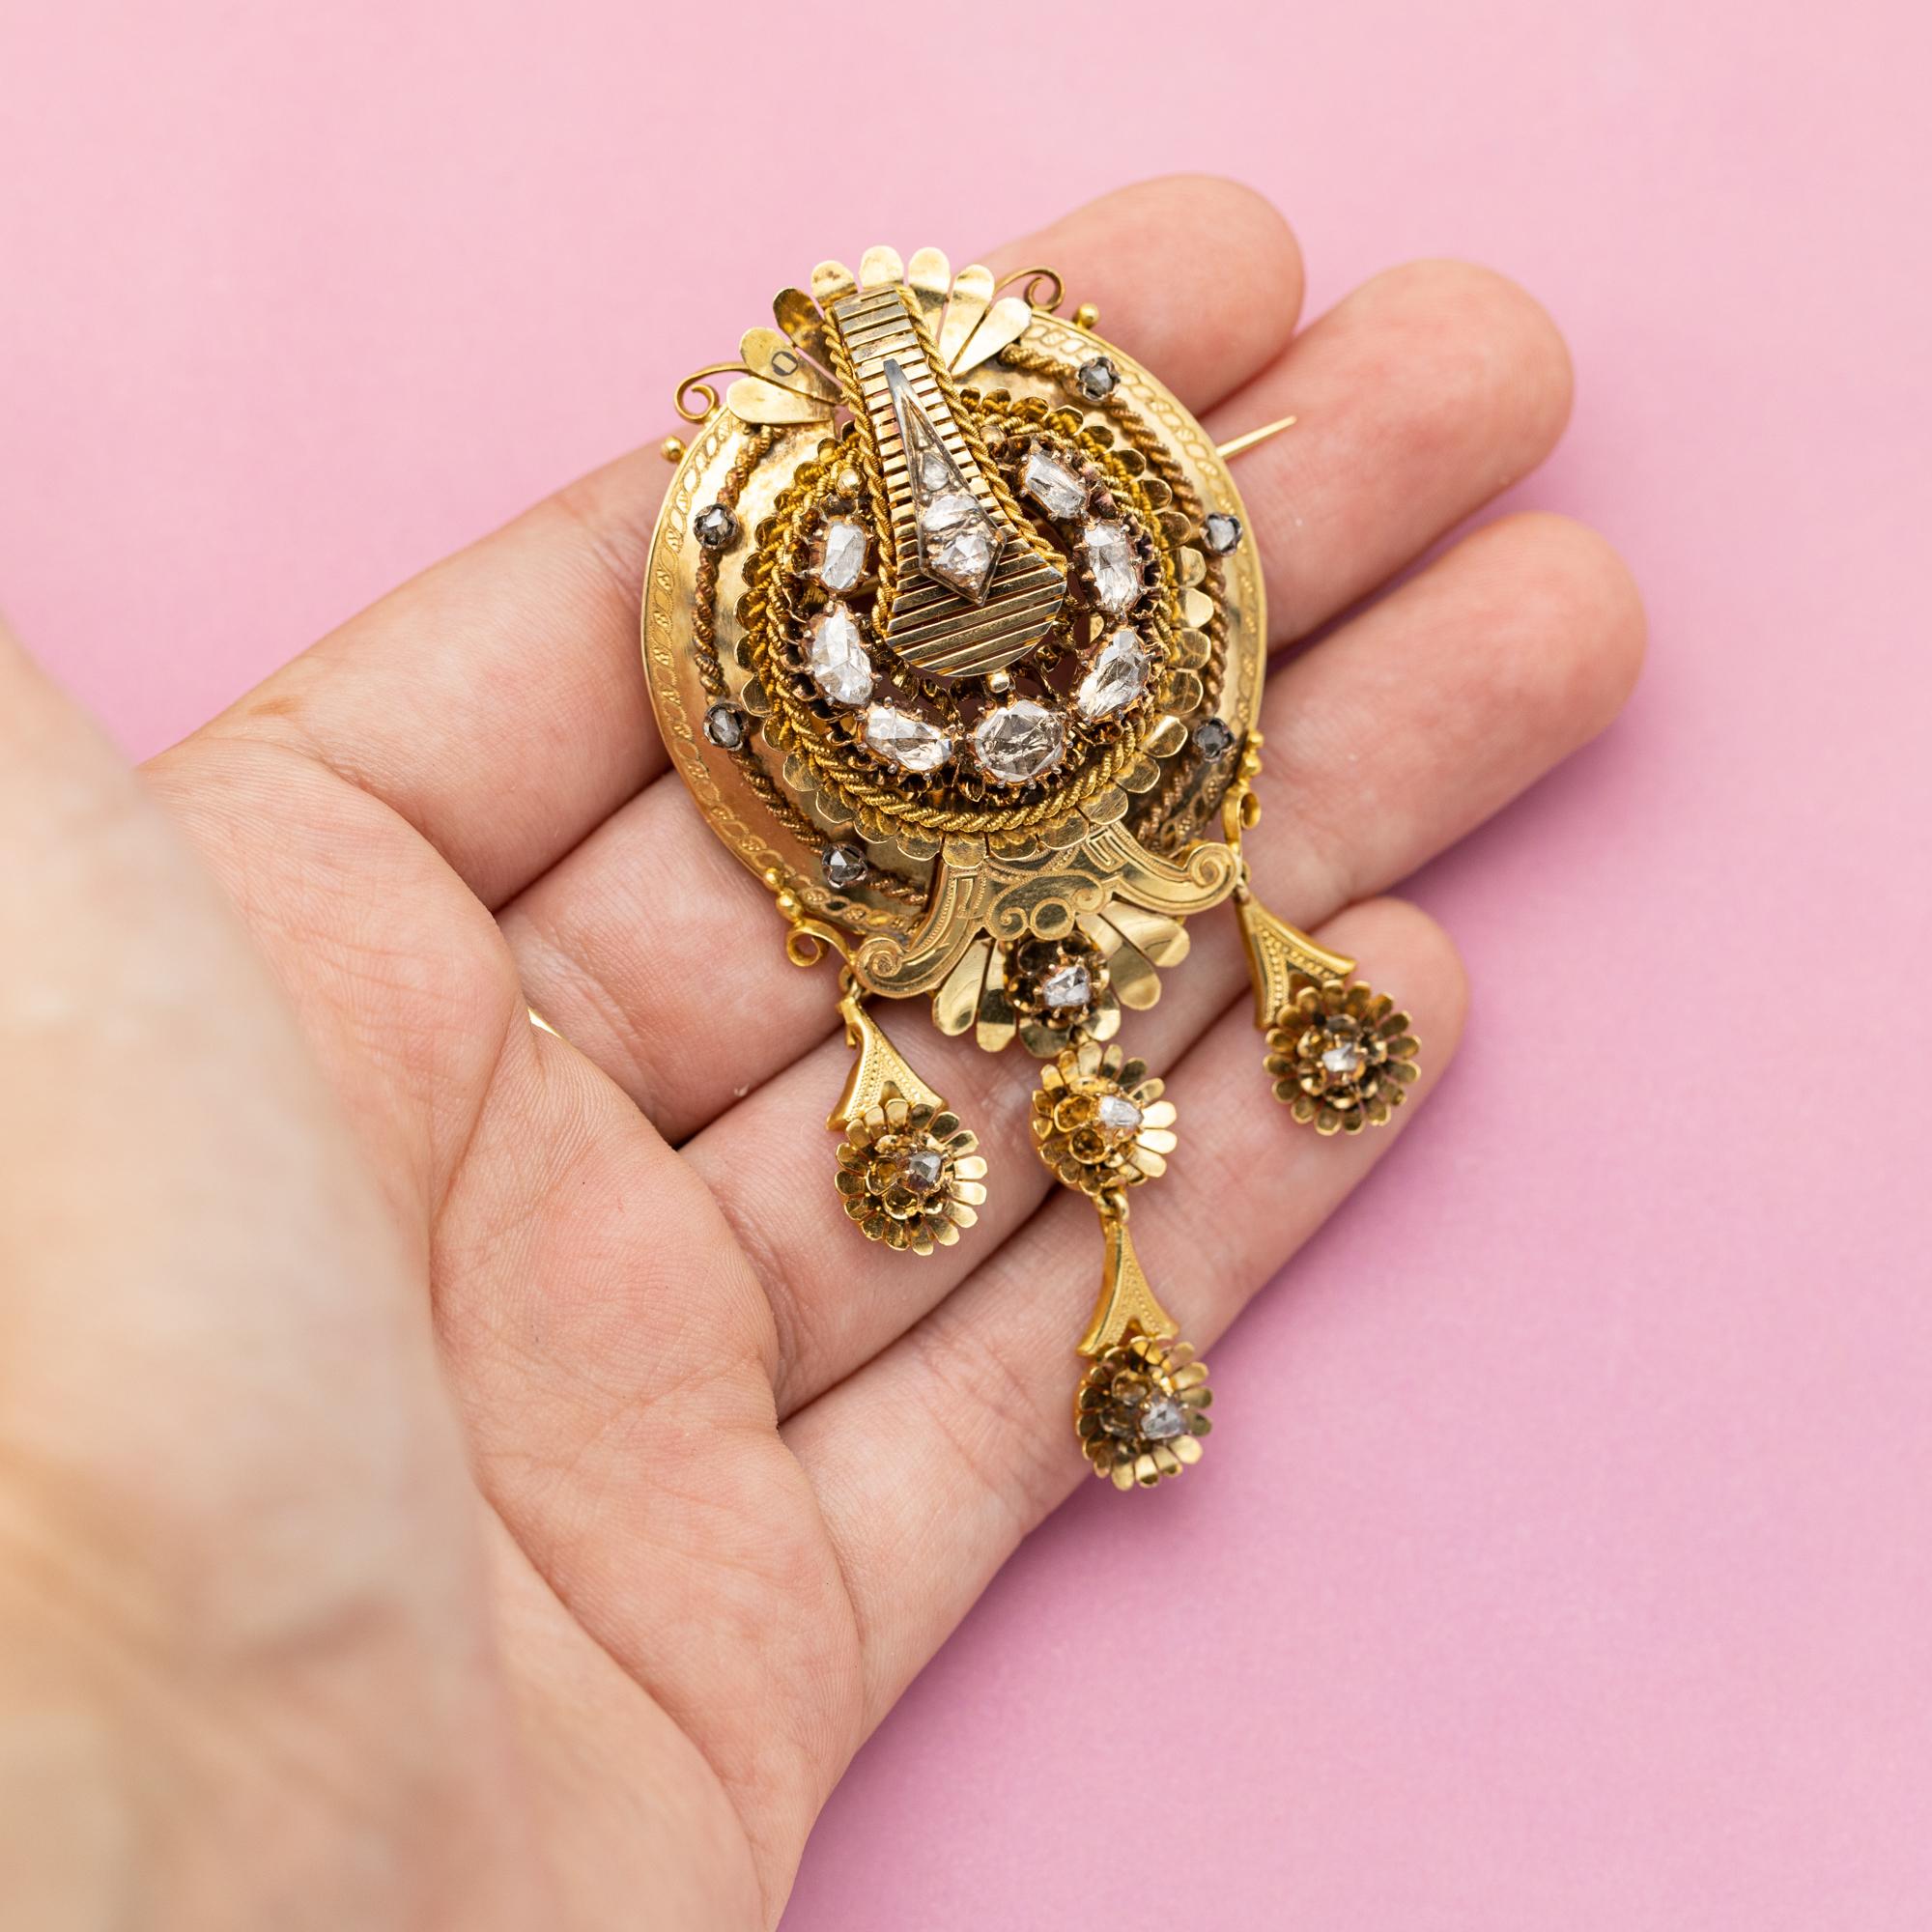 18ct yellow gold Victorian brooch - Large and heavy foiled back diamond heirloom For Sale 1